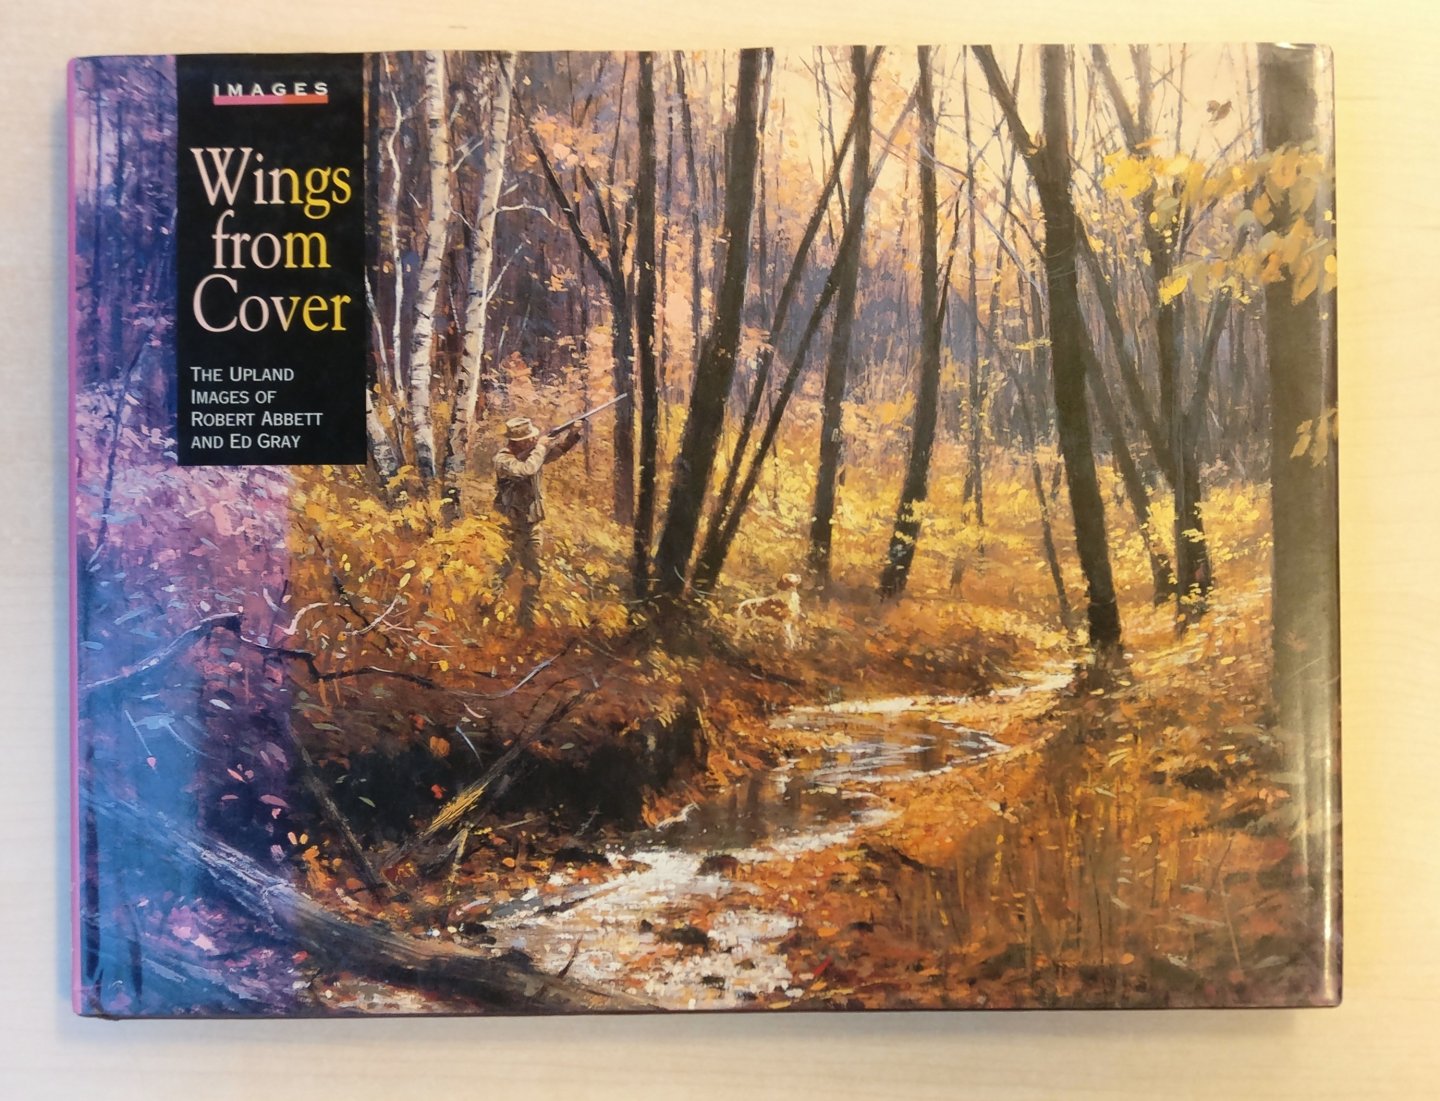  - Wings from Cover - The Upland Images of Robert Abbett and Ed Gray